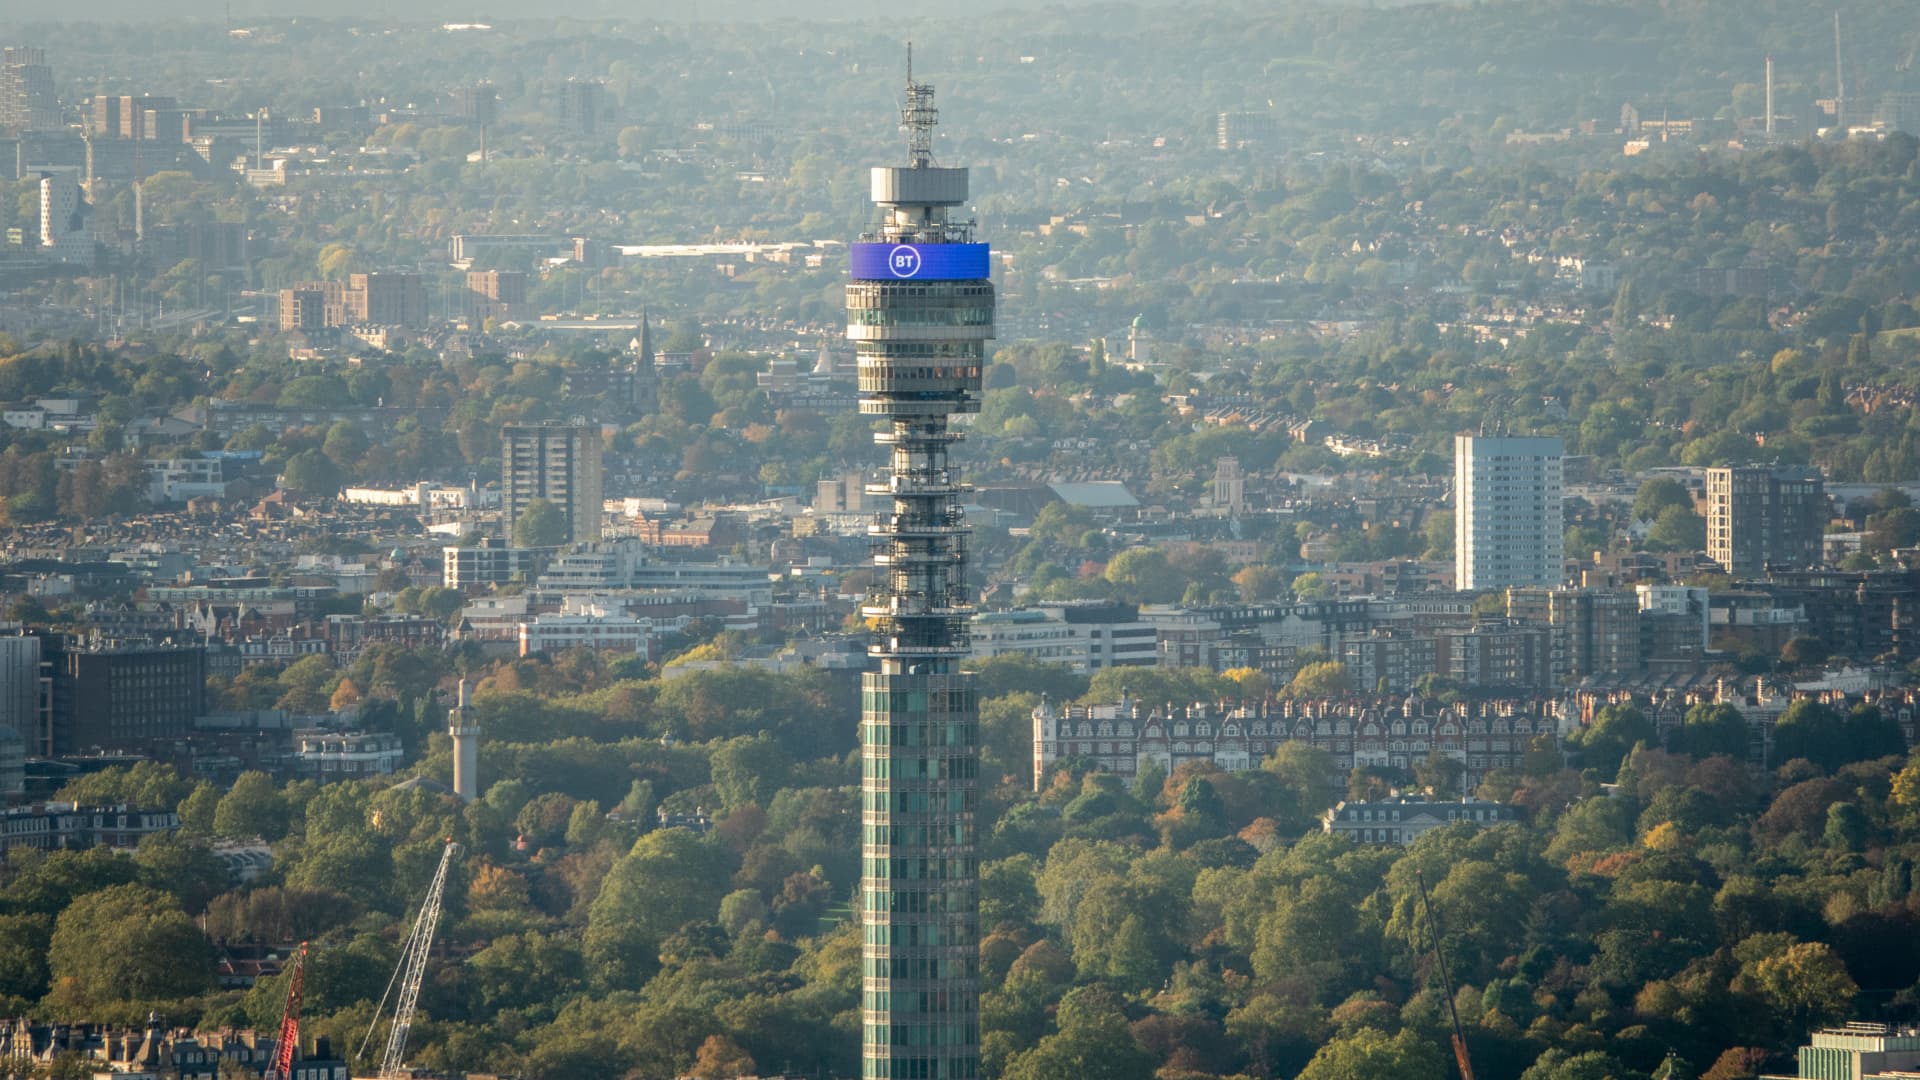 London’s famed BT Tower sold to U.S. hotel group for $347 million